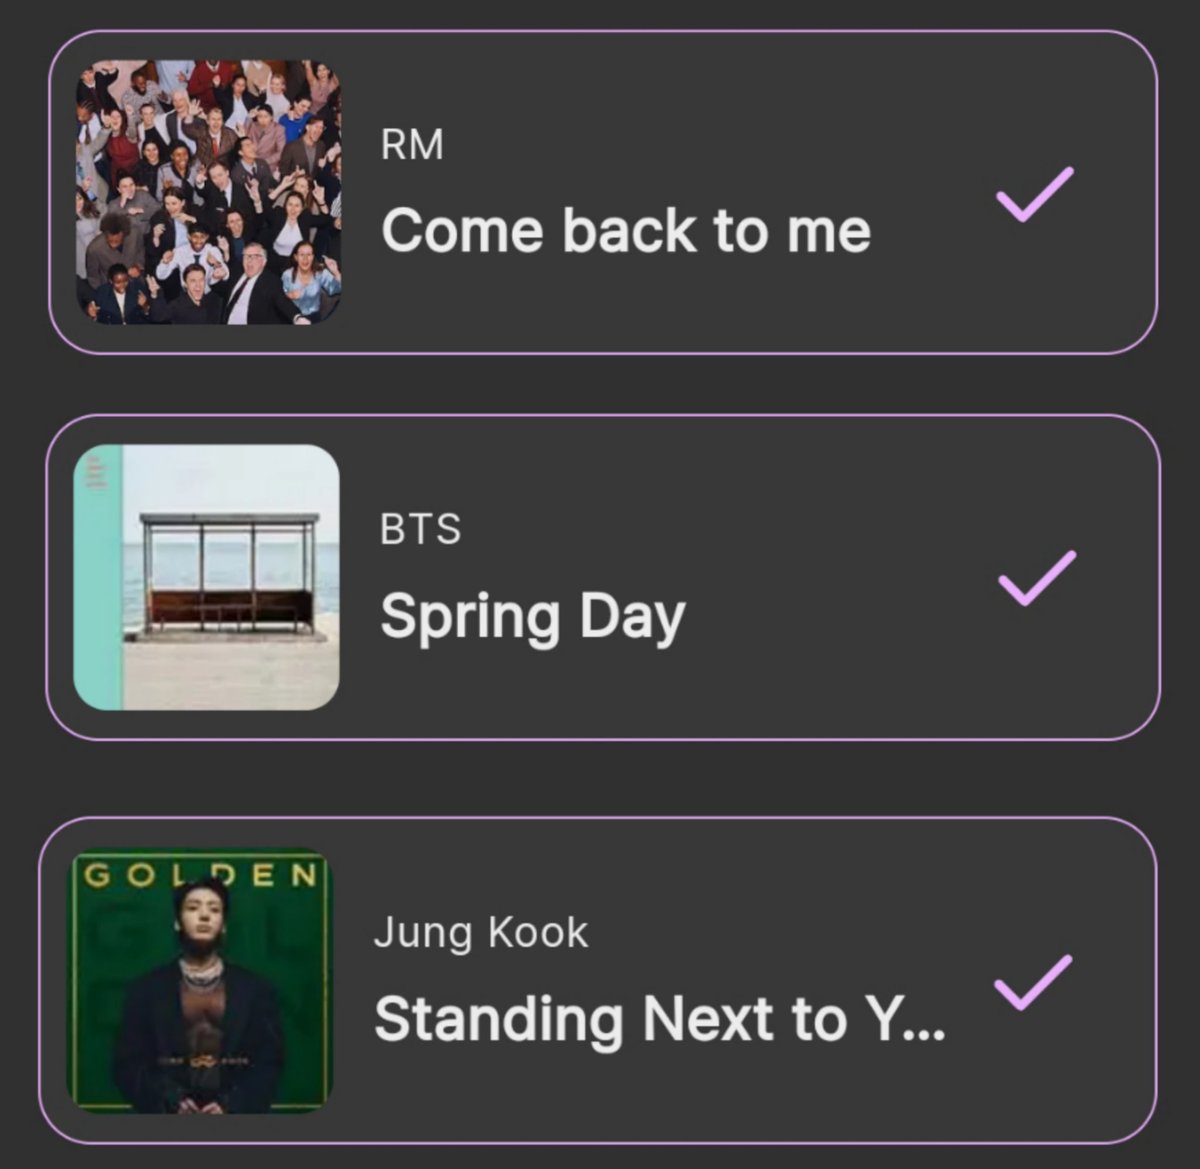 ‼️ ARMYS 'CBTM', 'SNTY' AND 'SPRING DAY' HAVE BEEN NOMINATED ON SBS INKIGAYO GLOBAL PREVOTING, SO PLS VOTE‼️

🗳:lnk.diggus.com/vote
📅:ENDS 17th MAY, 11:59pm kst